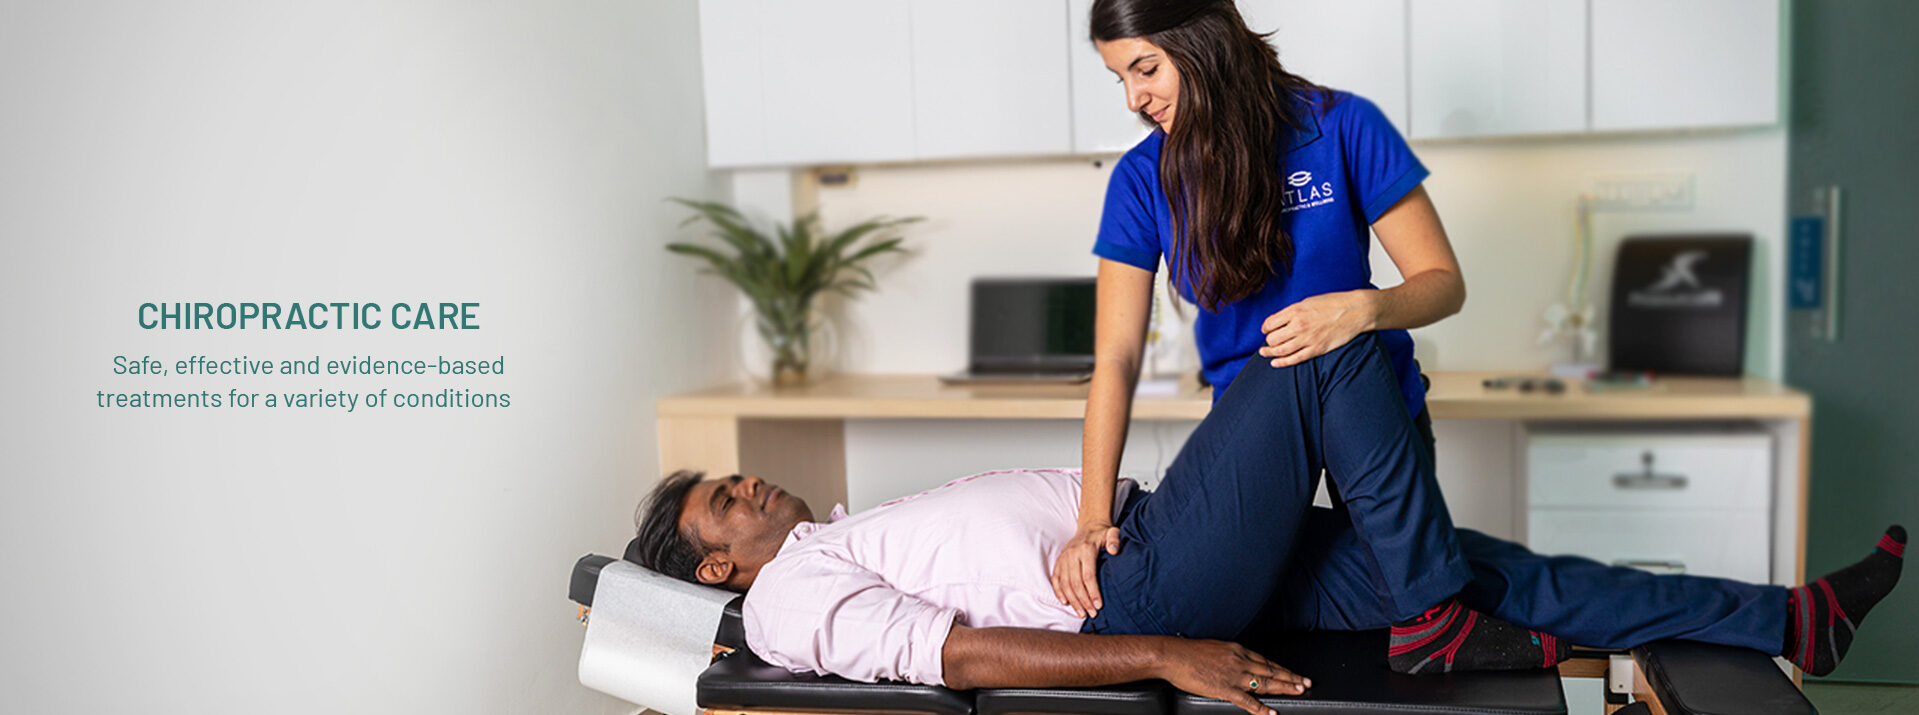 CHIROPRACTIC CARE Safe, effective and evidence-based treatments for a variety of conditions